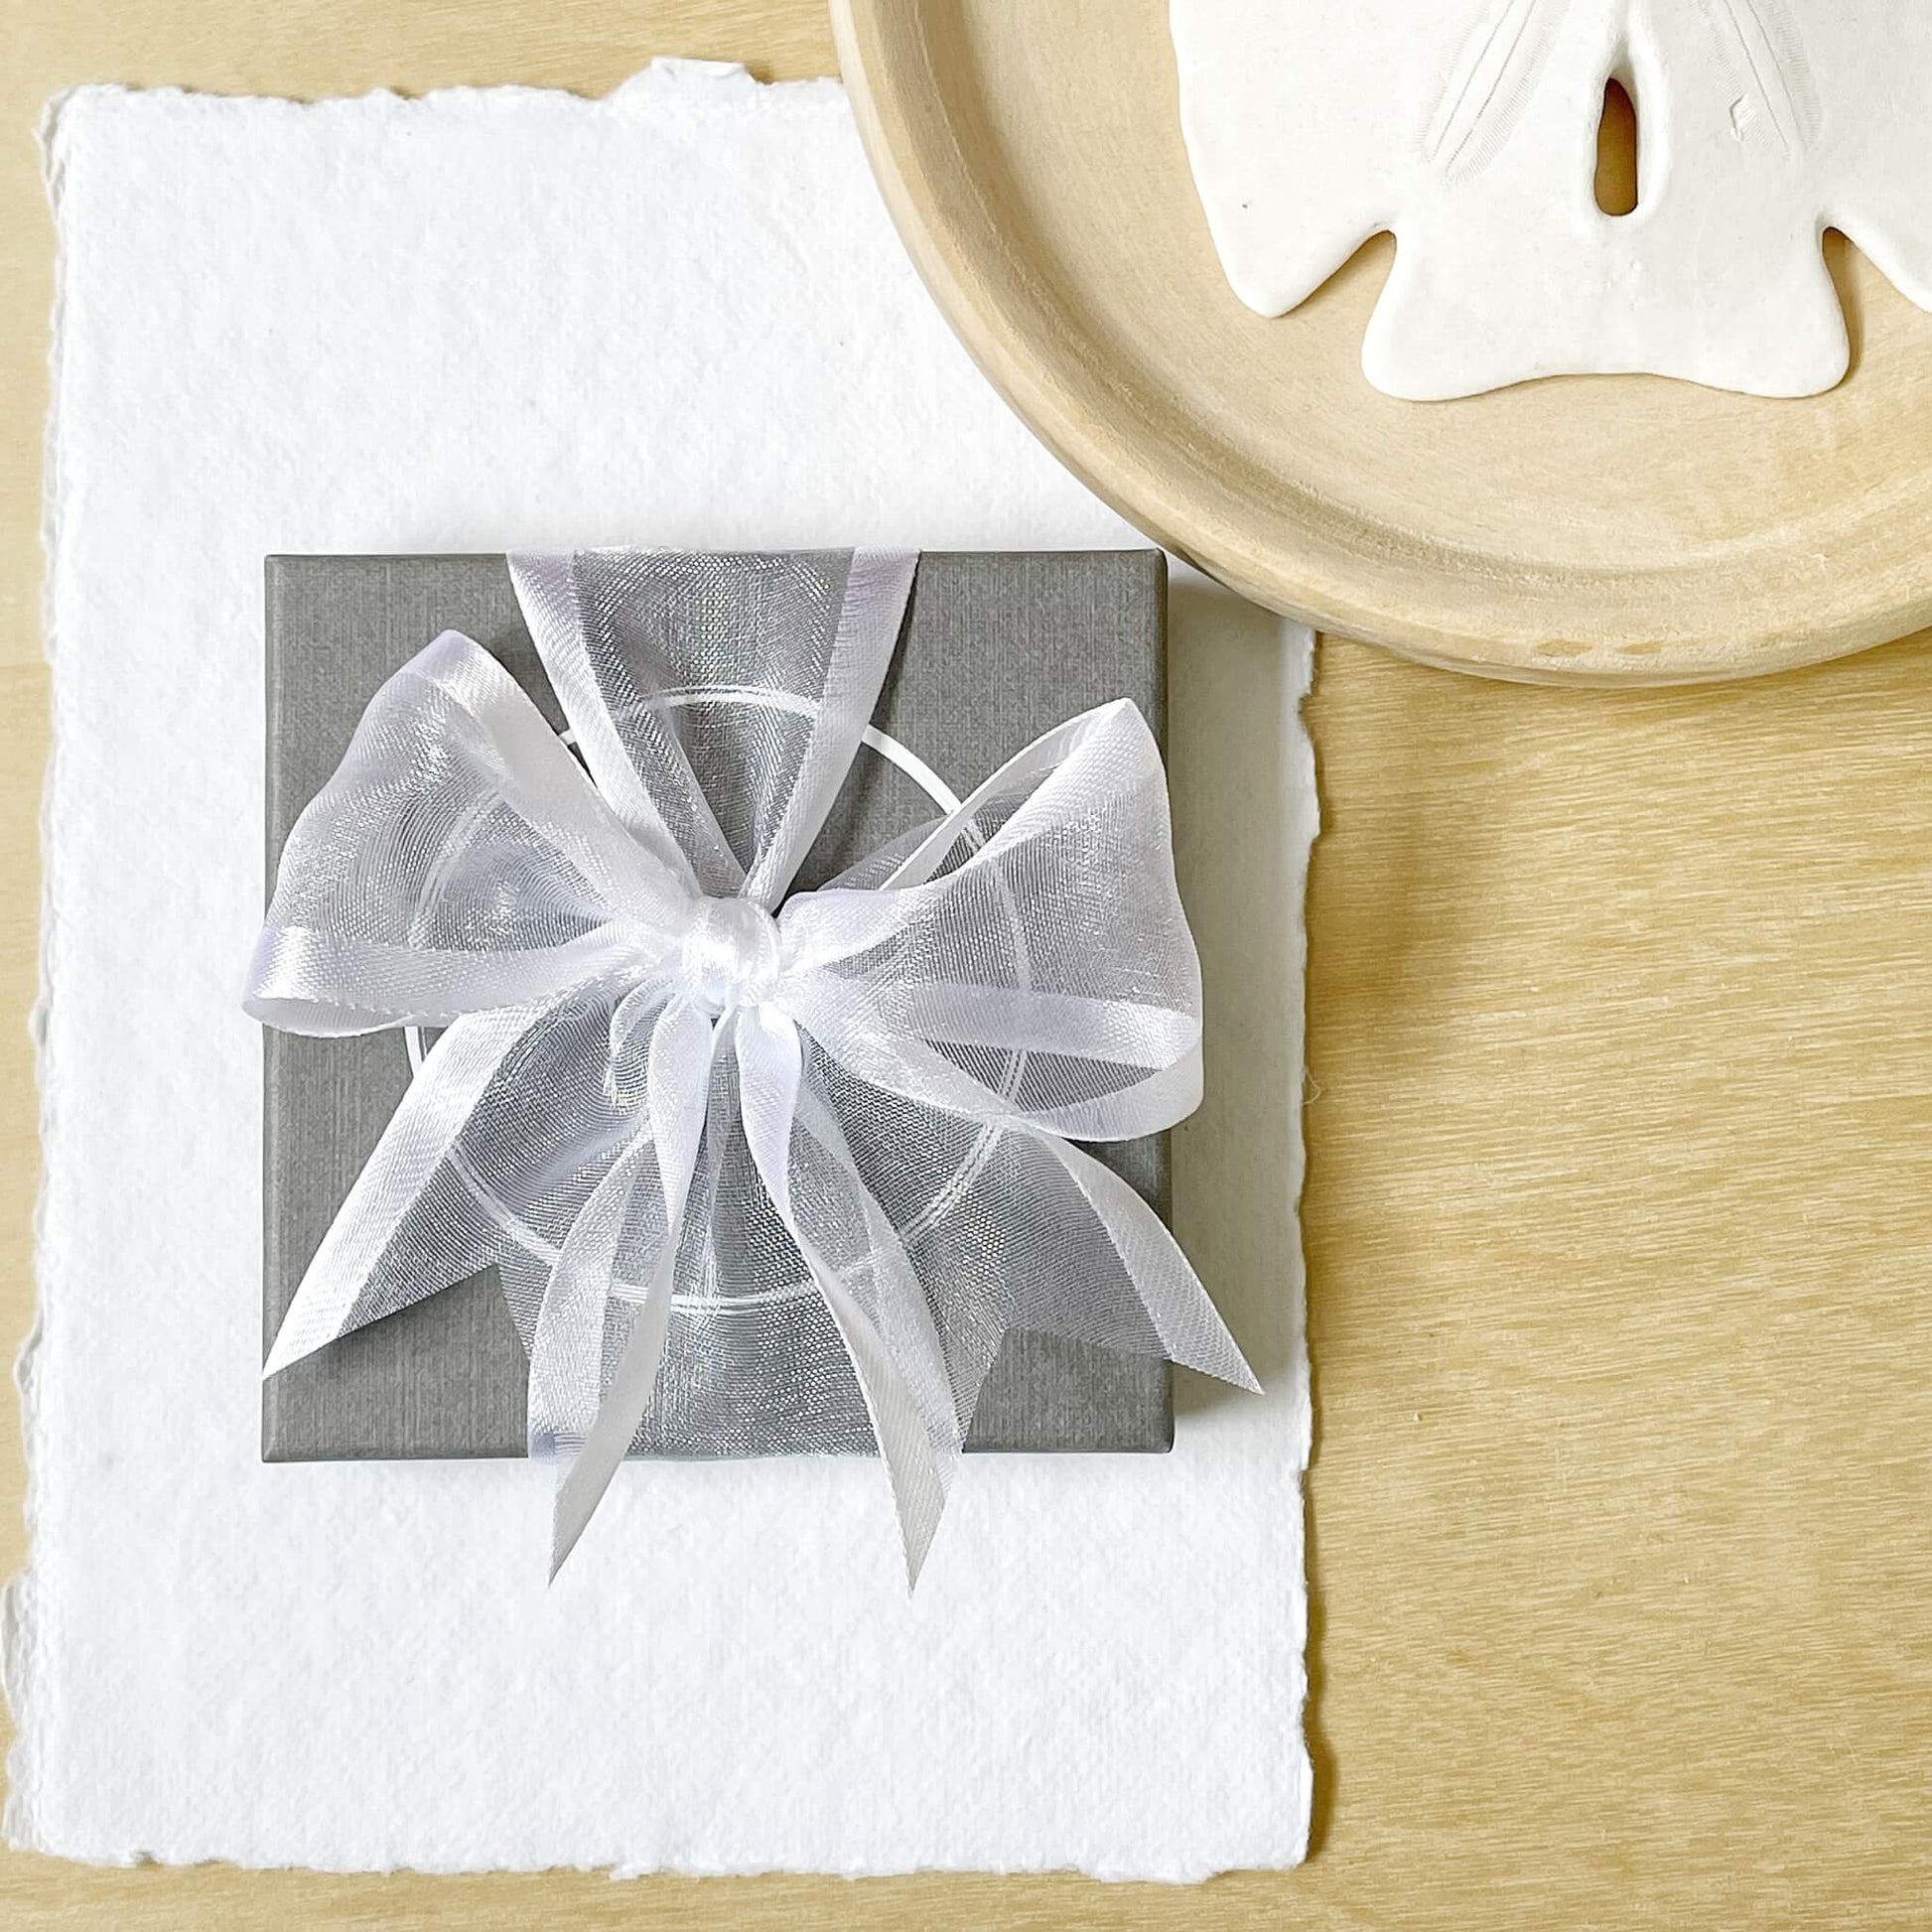 grey jewellery display gift box with white organza ribbon in a bow against a wooden background